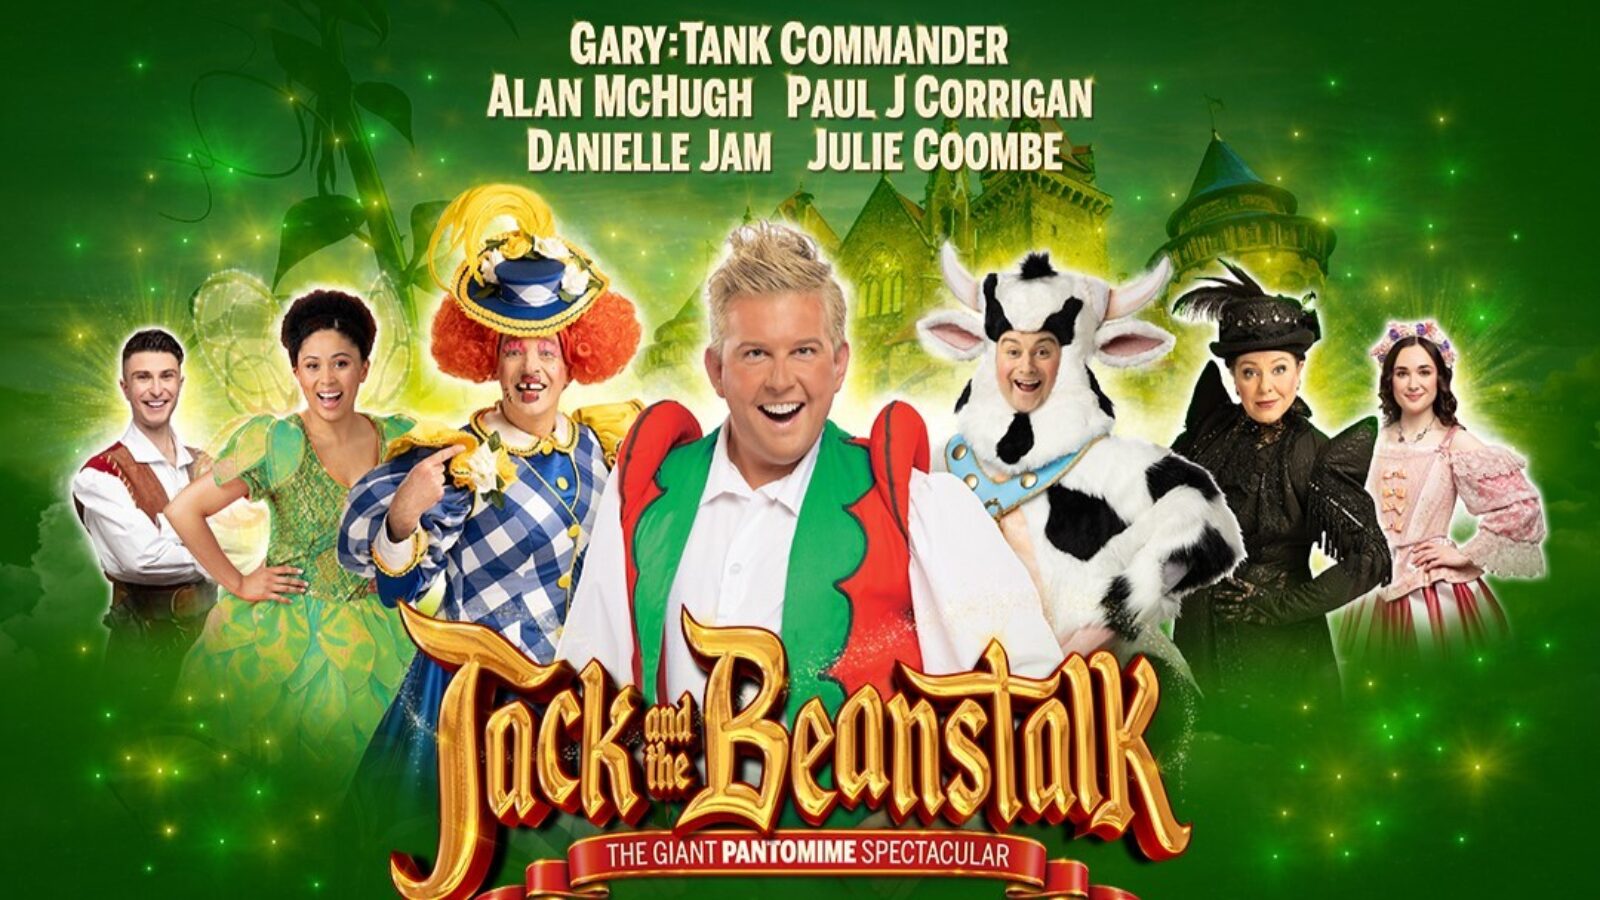 Gary:Tank Commander to lead returning panto cast in Jack and the Beanstalk at His Majesty’s Theatre